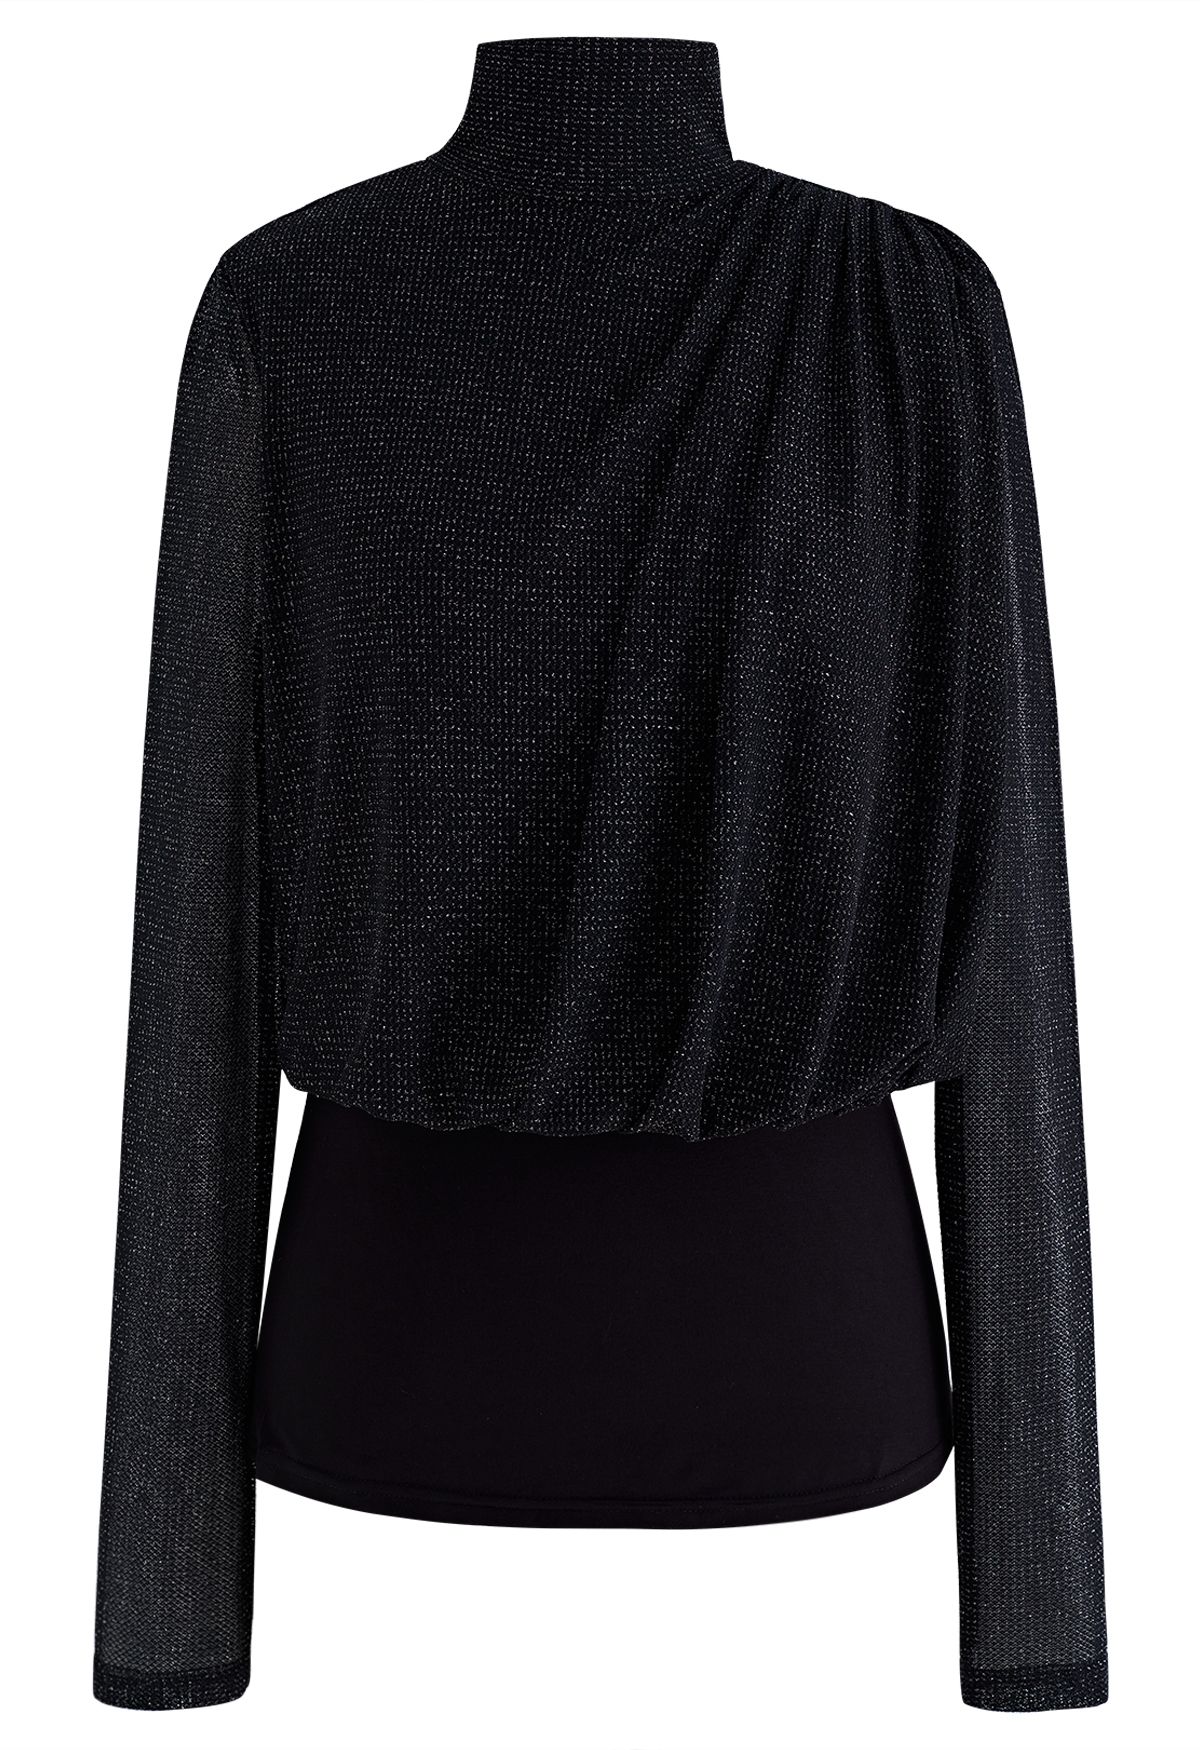 Gleam High Neck Spliced Ruched Top in Black